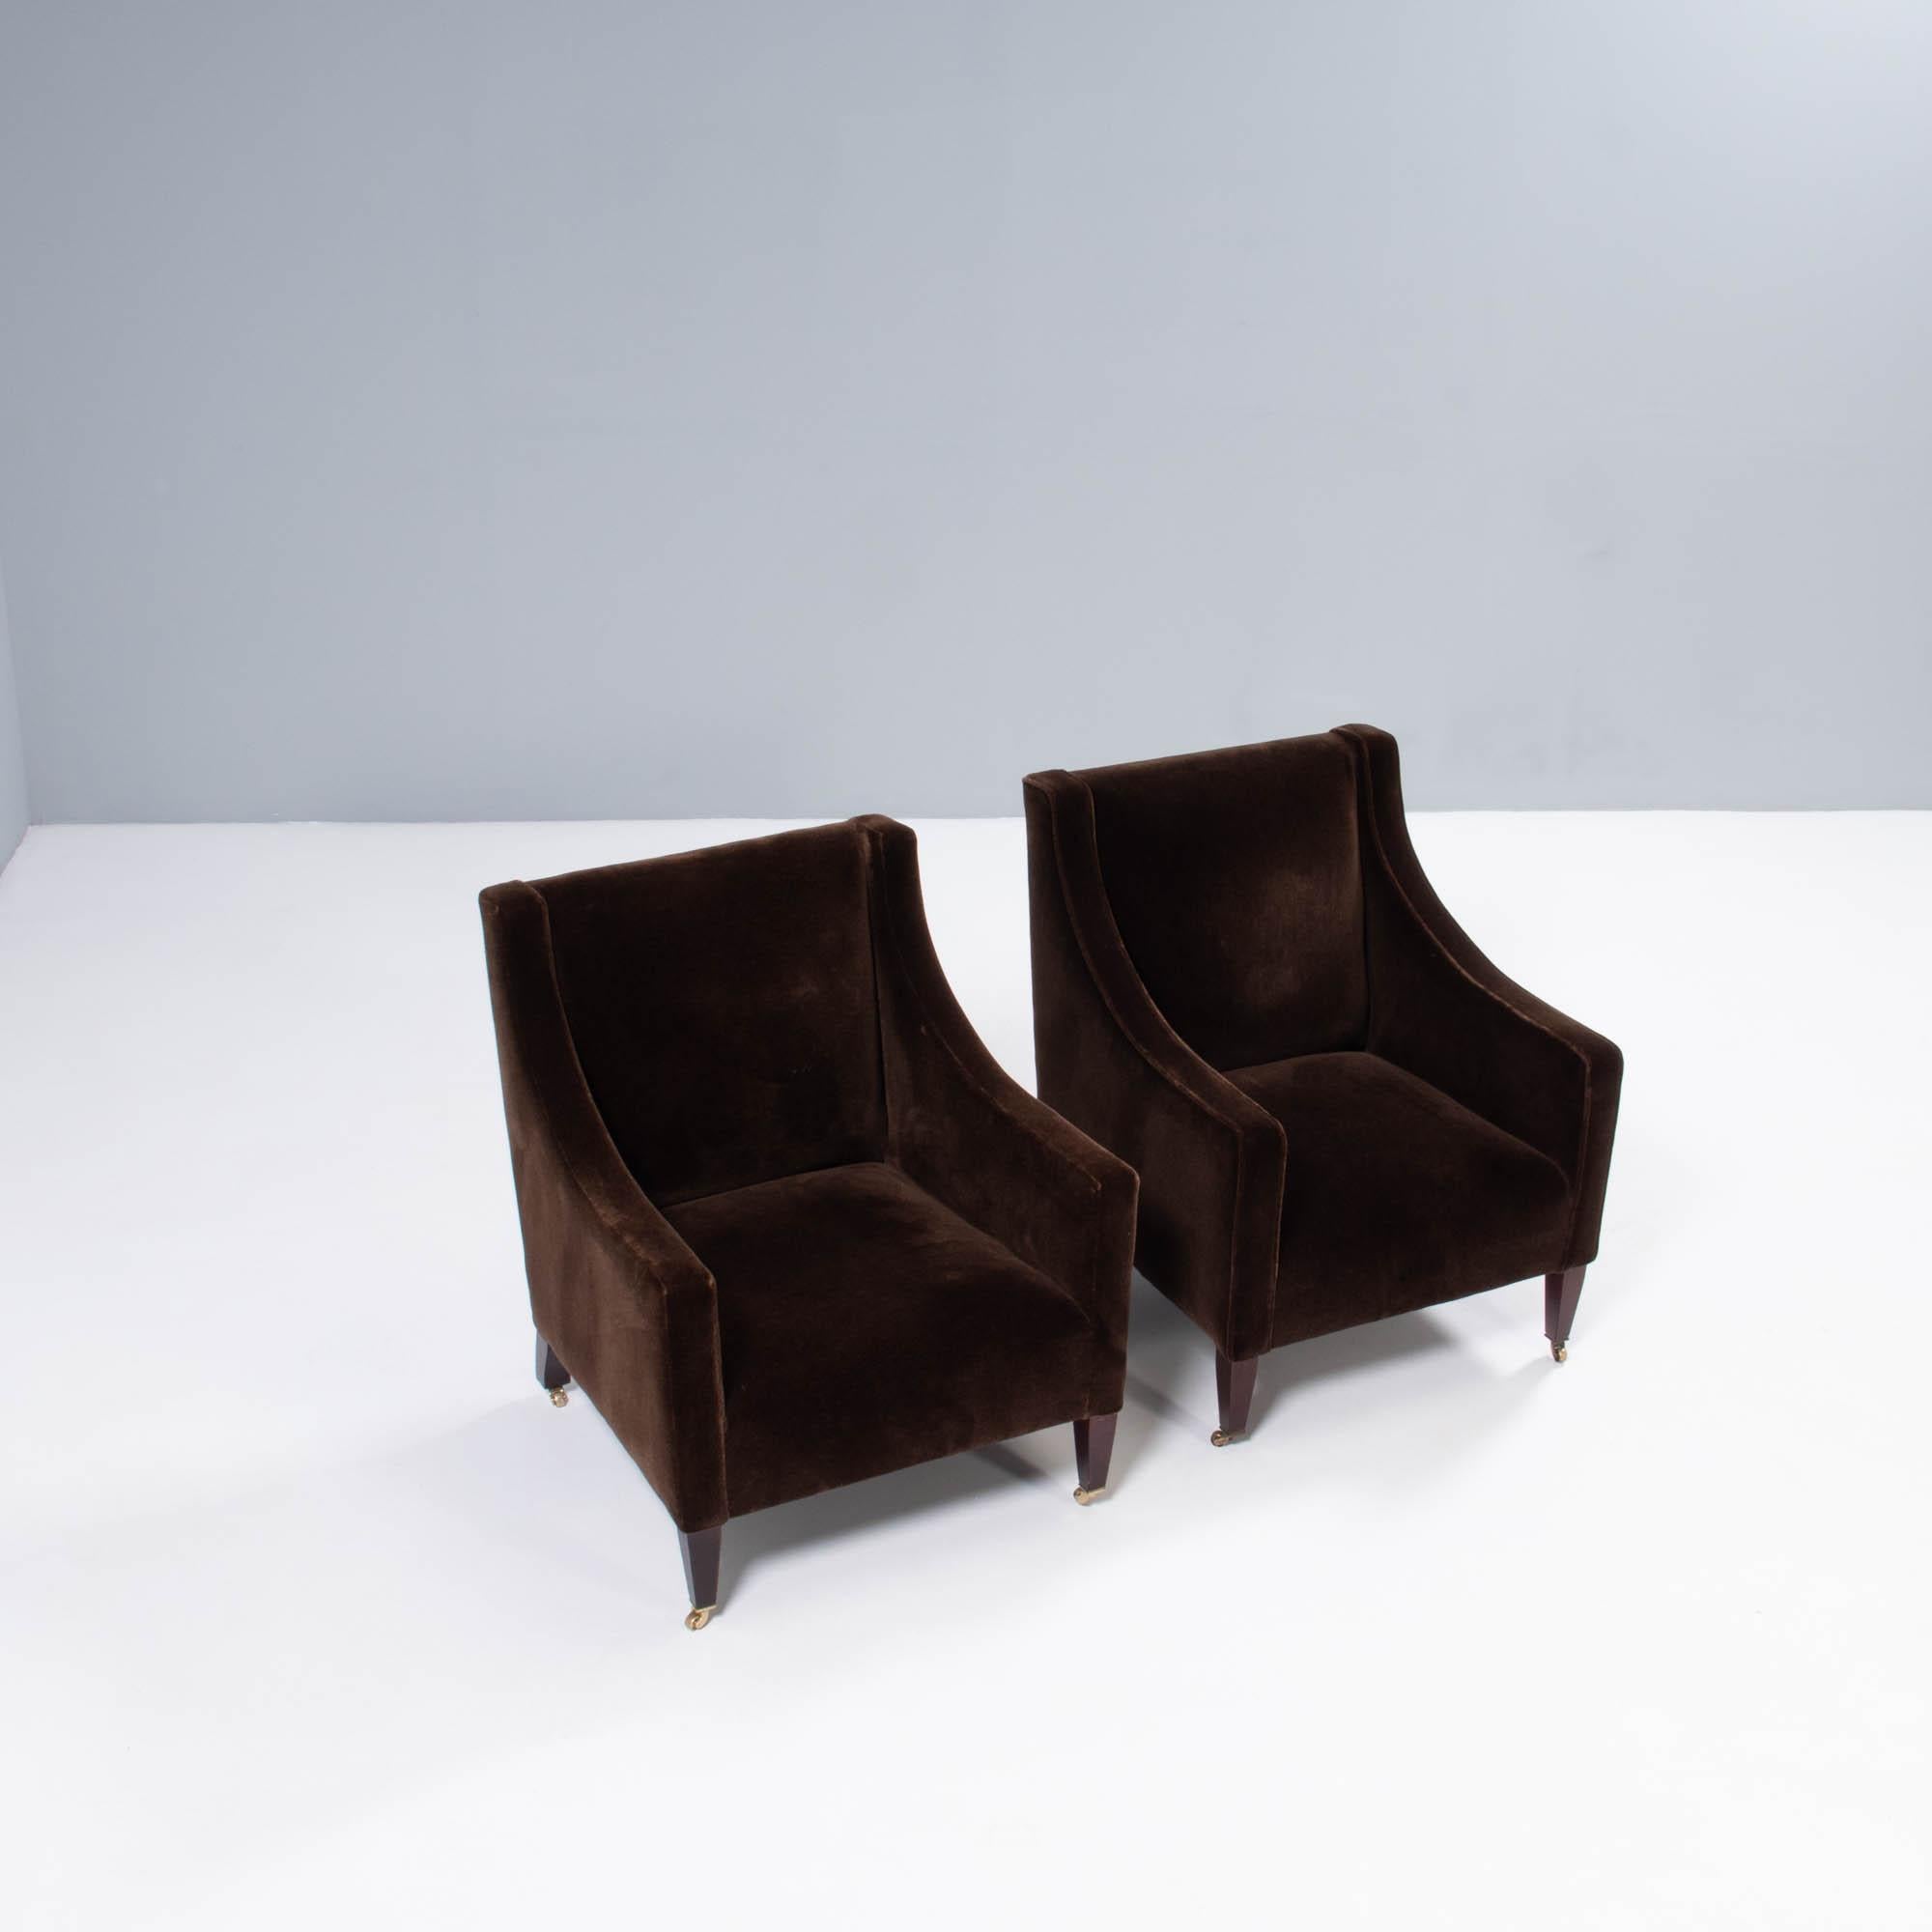 Designed and manufactured in the UK, using traditional techniques this Georgian armchair by George Smith combines classic design with modern comfort.

The chair has a fixed seat and is fully upholstered in brown velvet. The solid wooden legs are